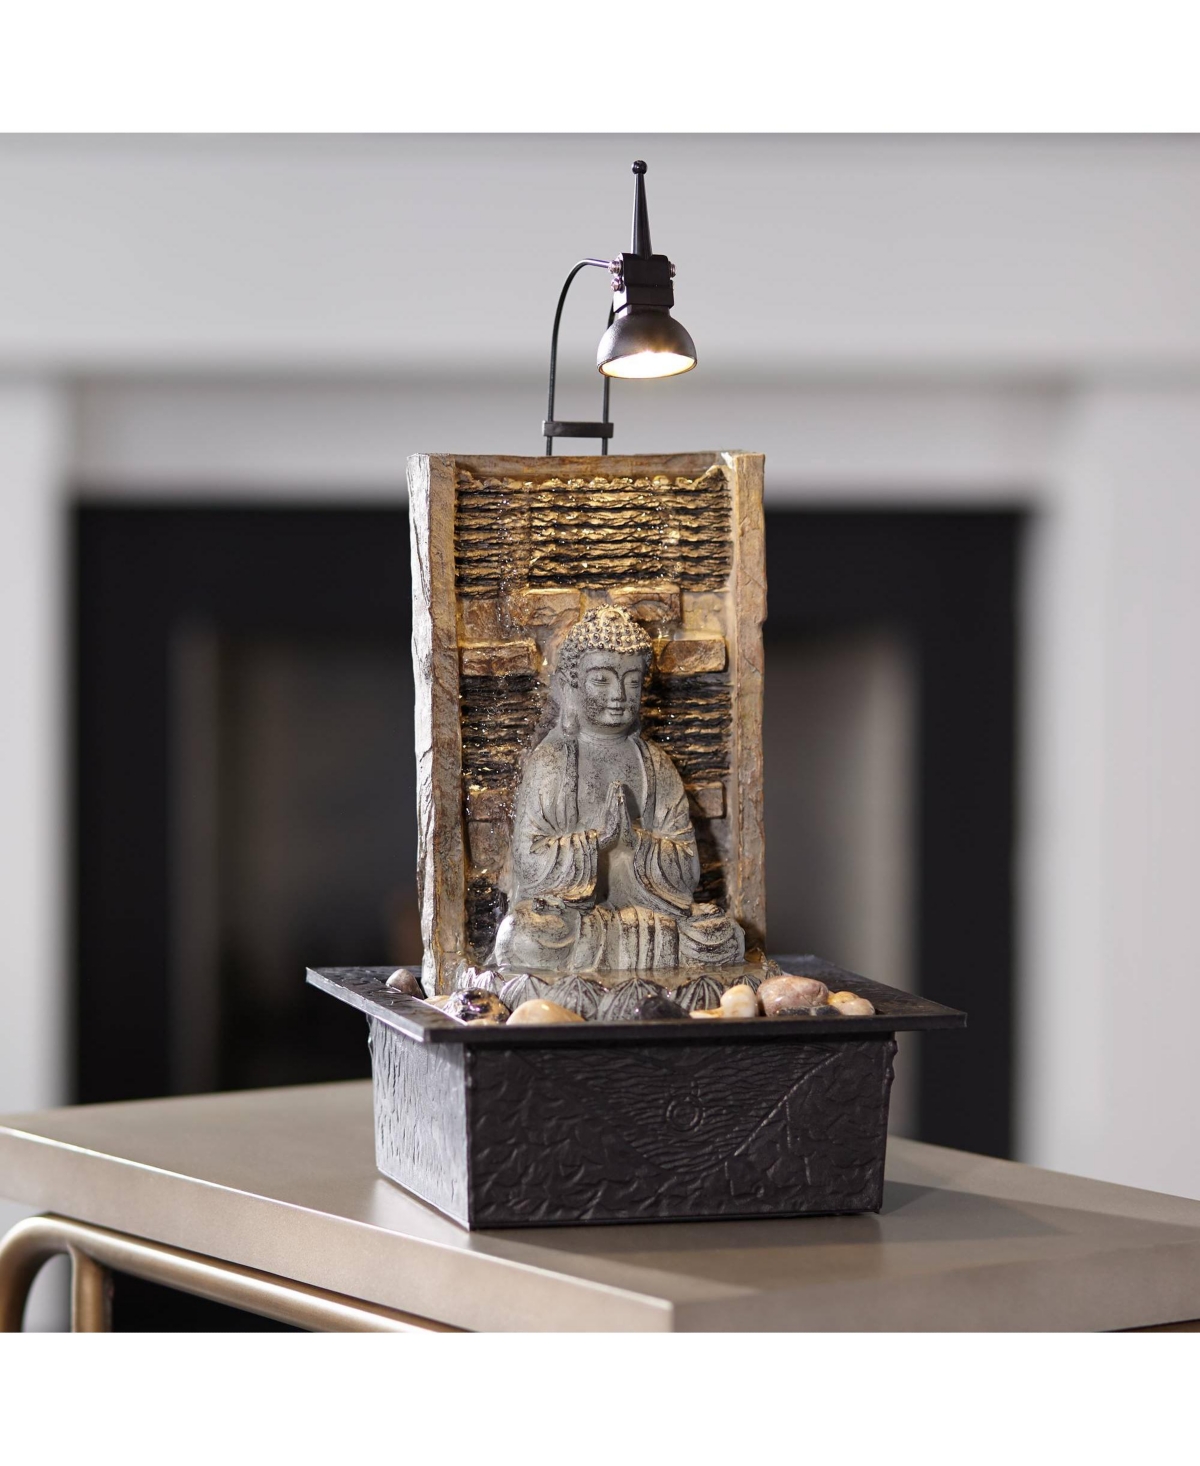 Namaste Buddha Zen Indoor Tabletop Small Waterfall Fountain 11 1/2" High with Led Light Meditation Decor for Table Desk-Top Home Office Bedroom House